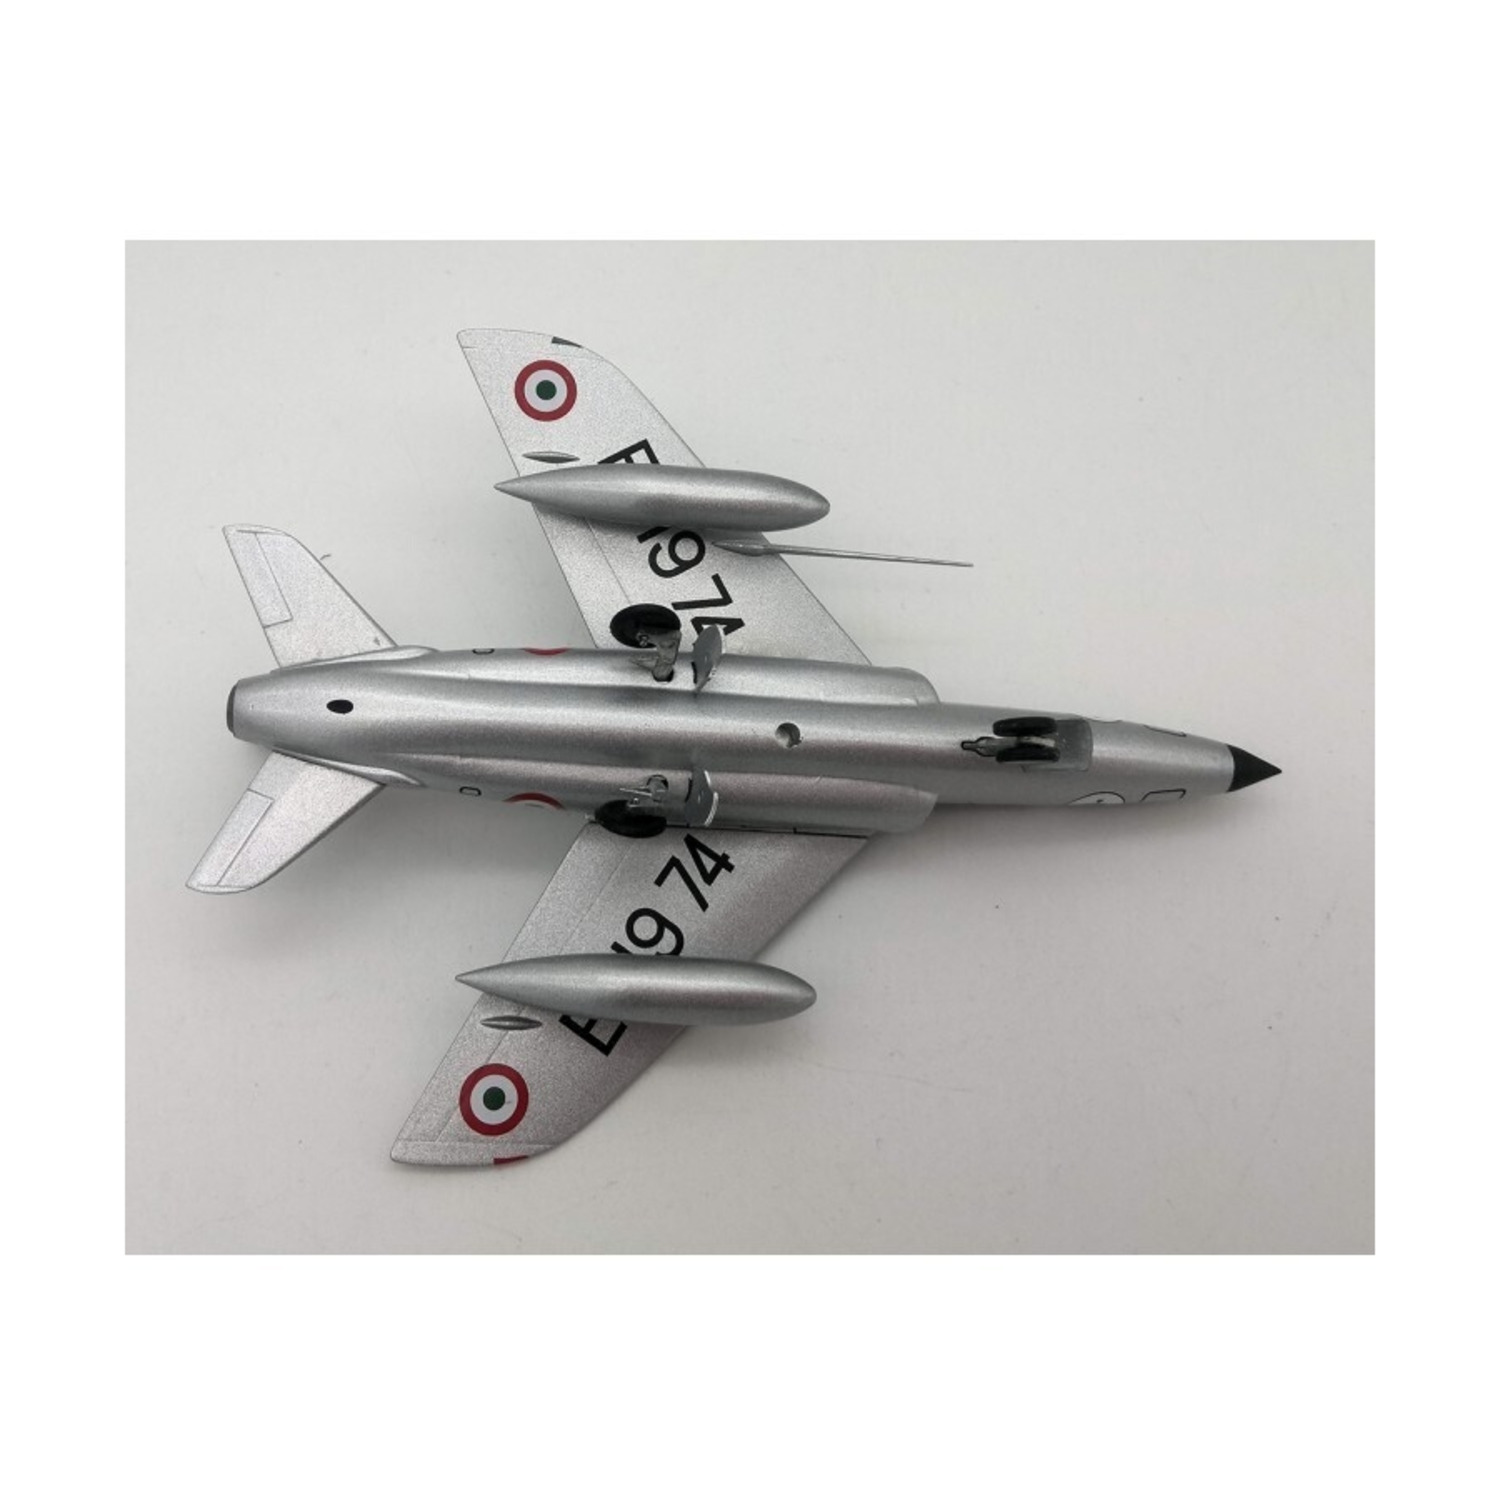 Folland Gnat F.1 (Limited Edition) New - image 2 of 2